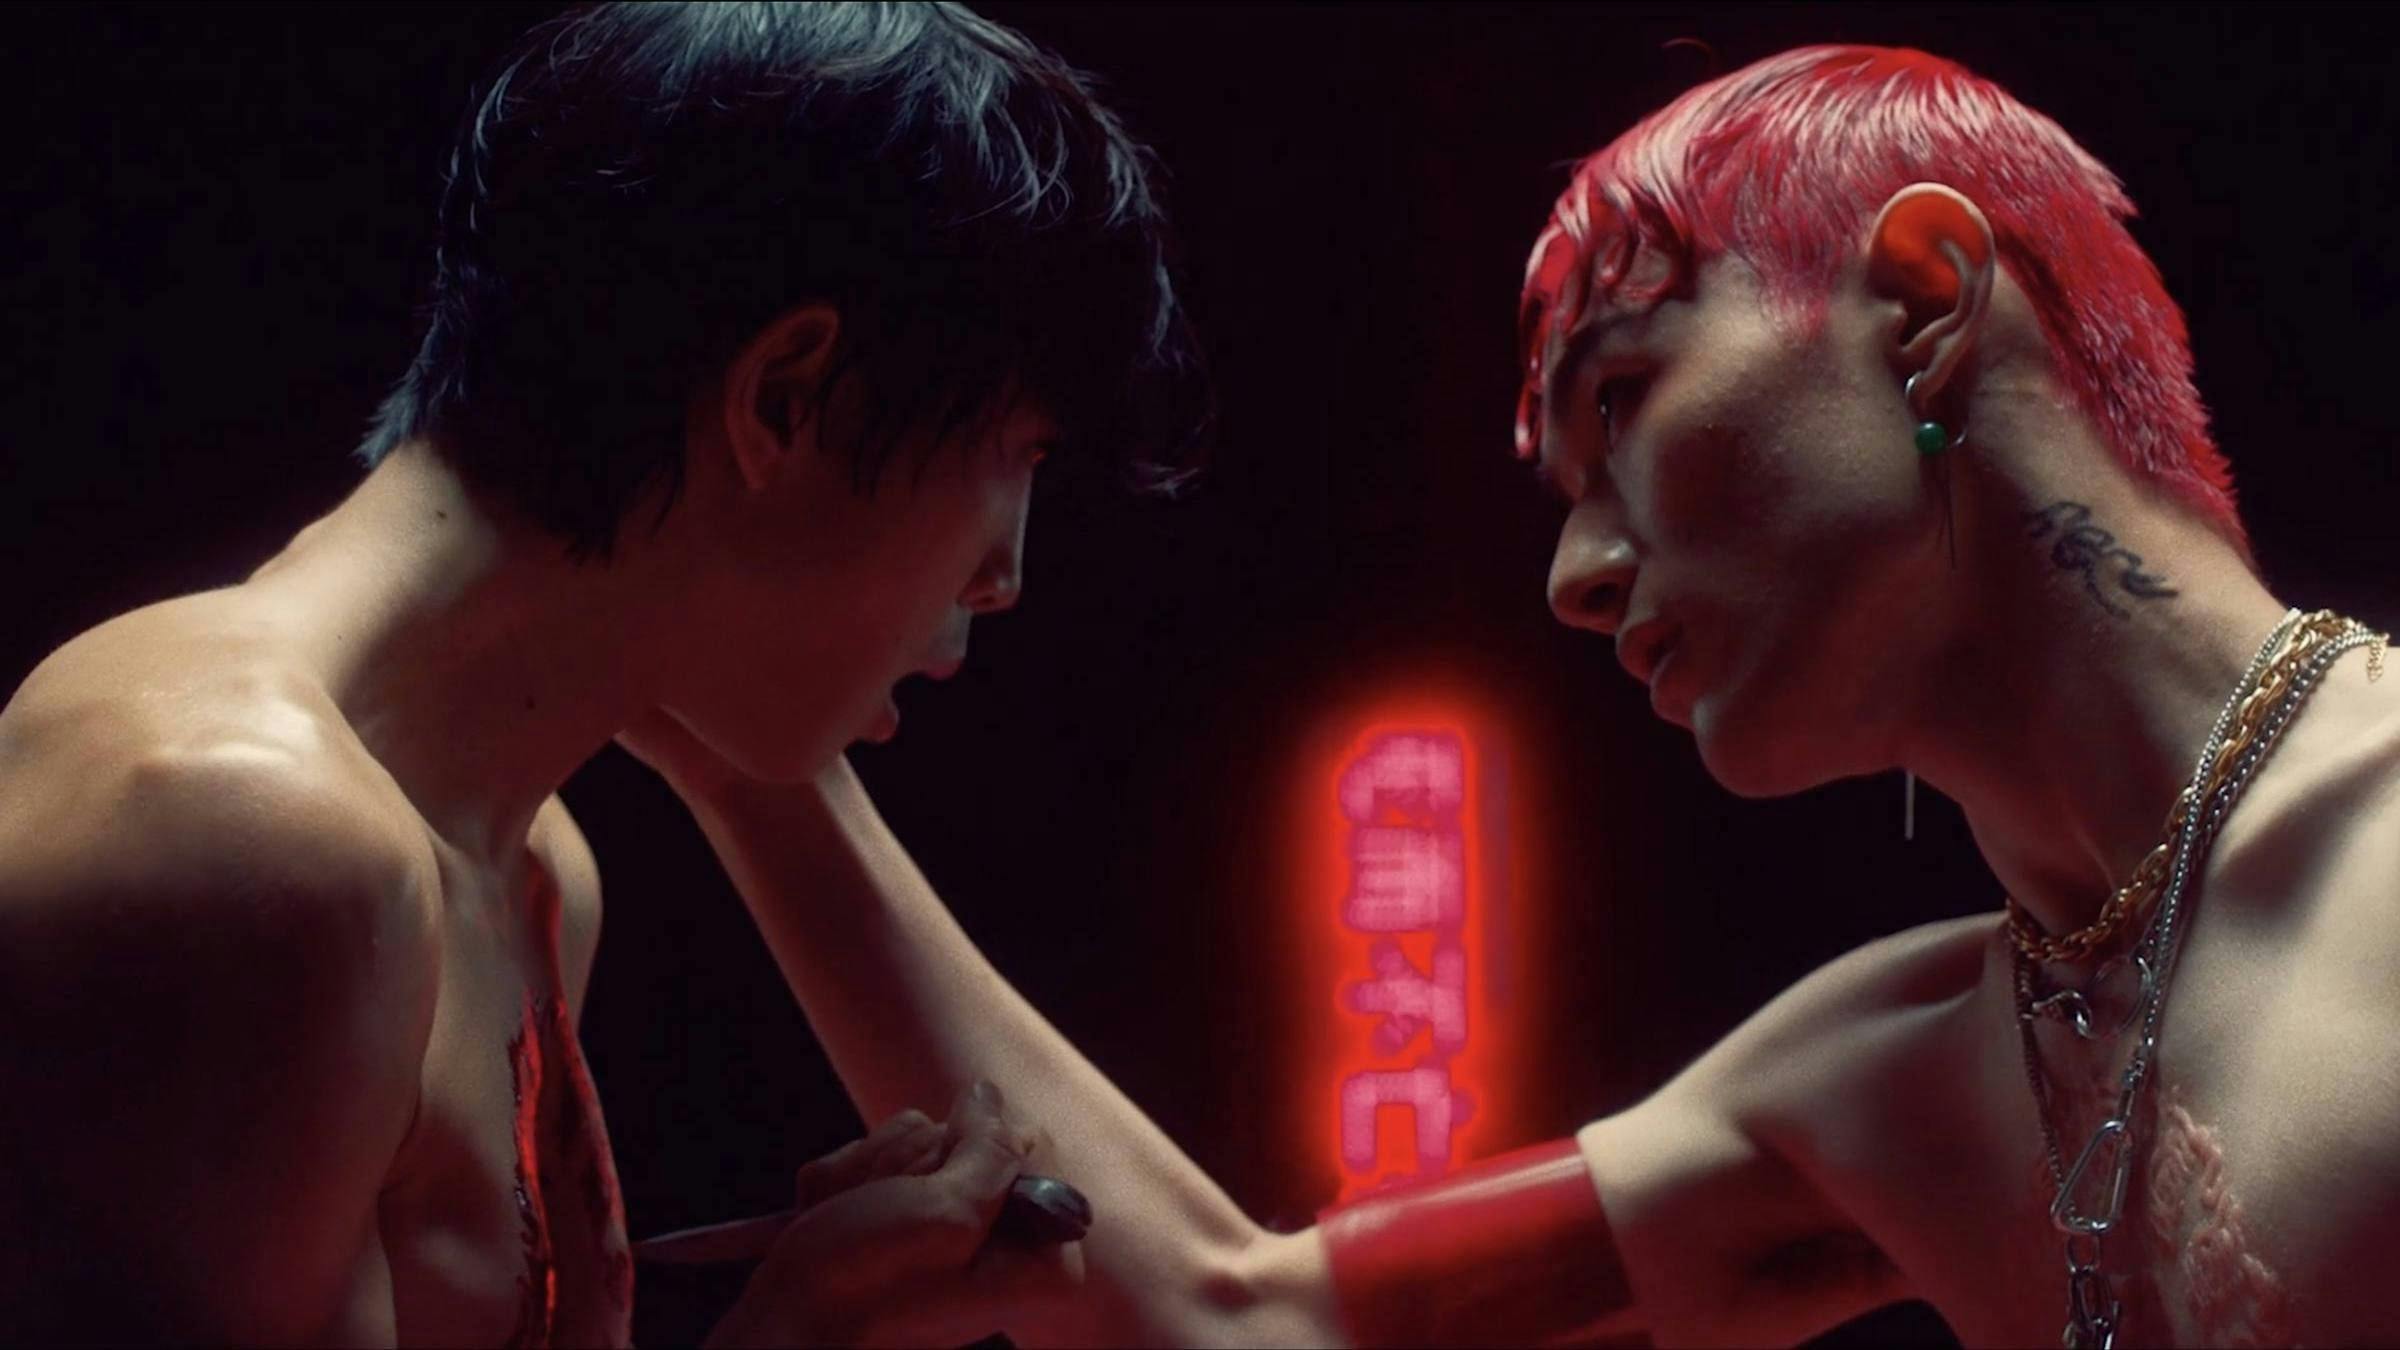 2 shirtless people face each other and seem to be leaning into each other to kiss. One person has red hair the other has black. We can see Chinese language characters in the background emanating red light. The space is dark